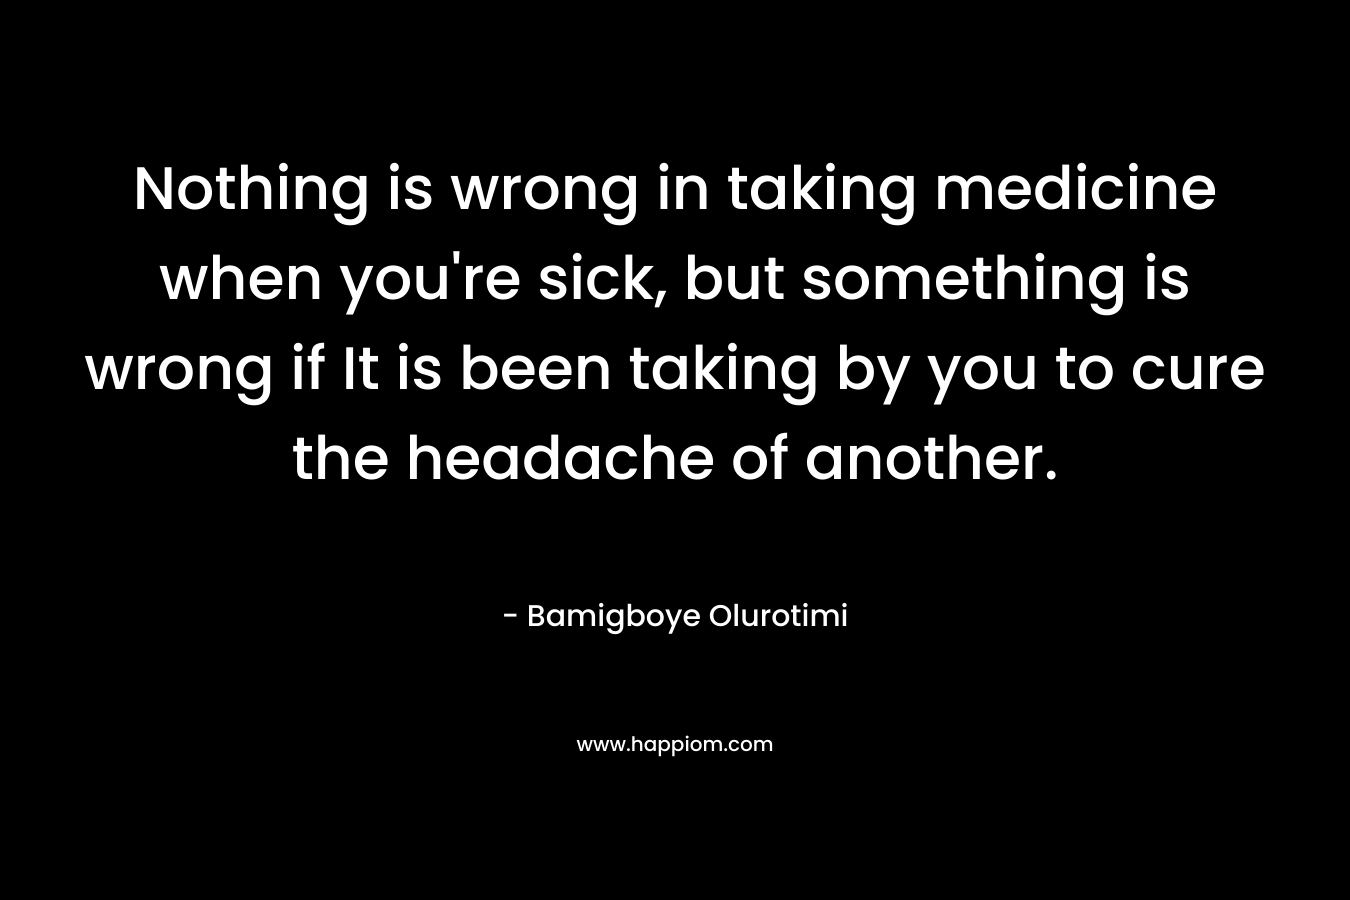 Nothing is wrong in taking medicine when you're sick, but something is wrong if It is been taking by you to cure the headache of another.